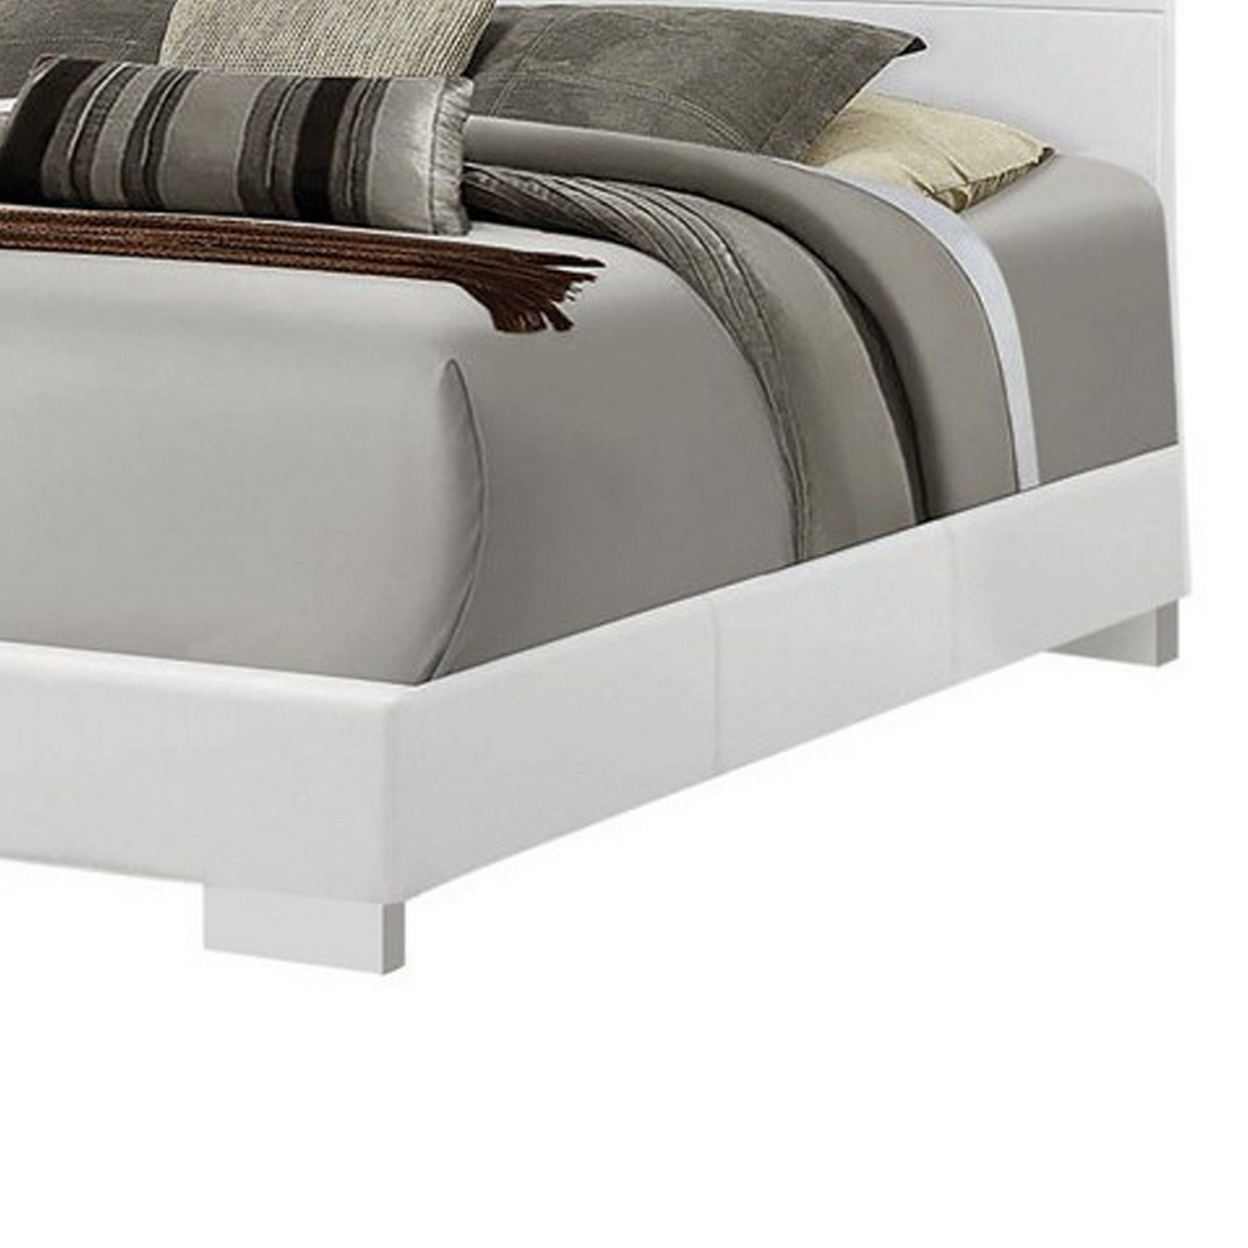 Contemporary Style Low Profile California King Bed With Block Feet, White- Saltoro Sherpi